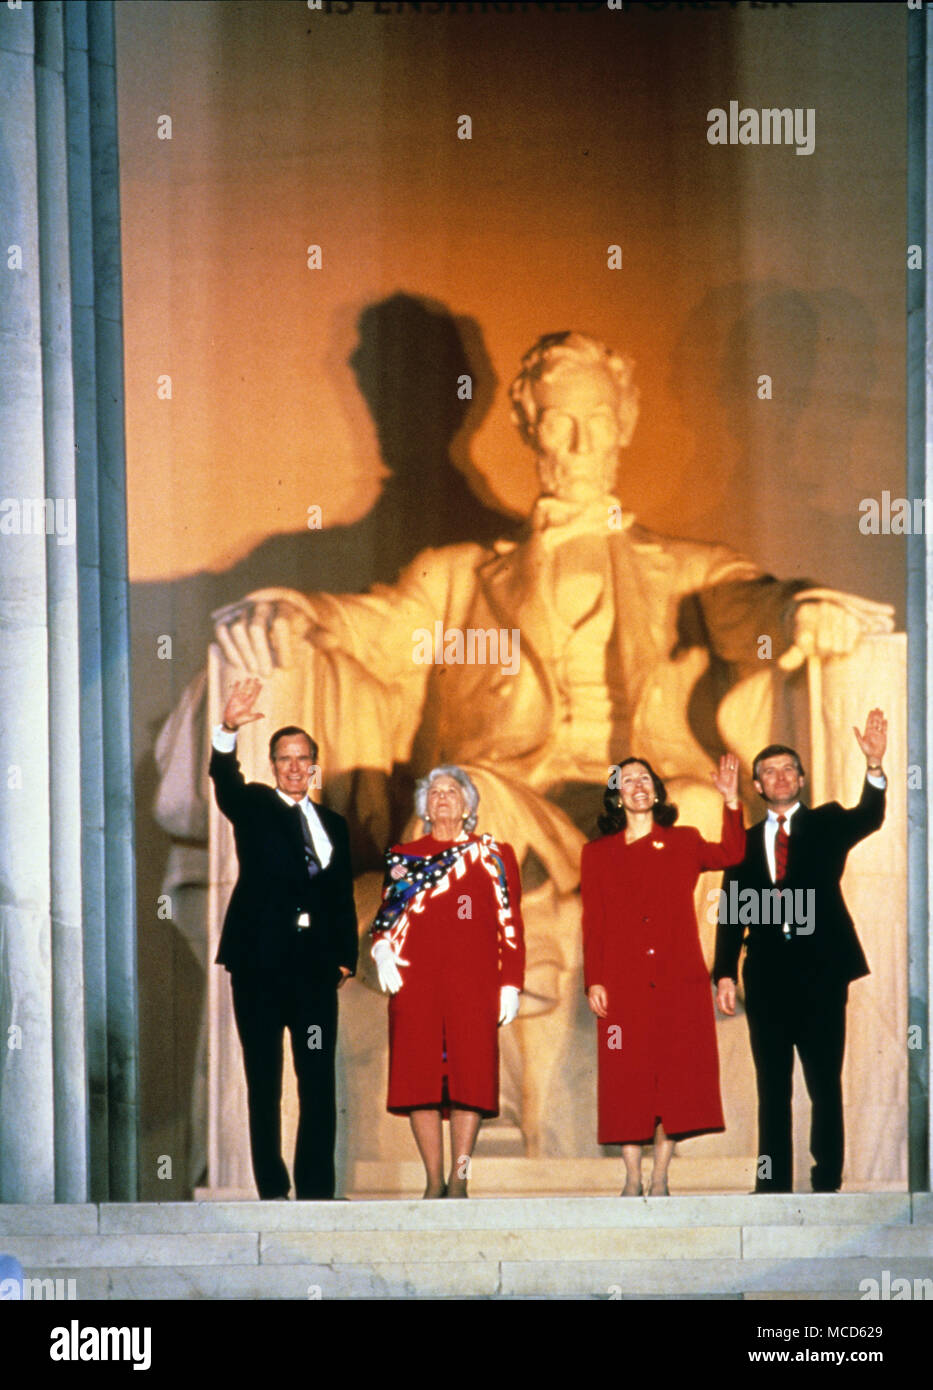 United States President-elect George H.W. Bush attends the opening ceremony for his inauguration at the Lincoln Memorial in Washington, DC on January 18 1989. From left to right: President-elect Bush, Barbara Bush, Marilyn Quayle, and US Vice President-elect Dan Quayle. Credit: Robert Trippett/Pool via CNP /MediaPunch Stock Photo